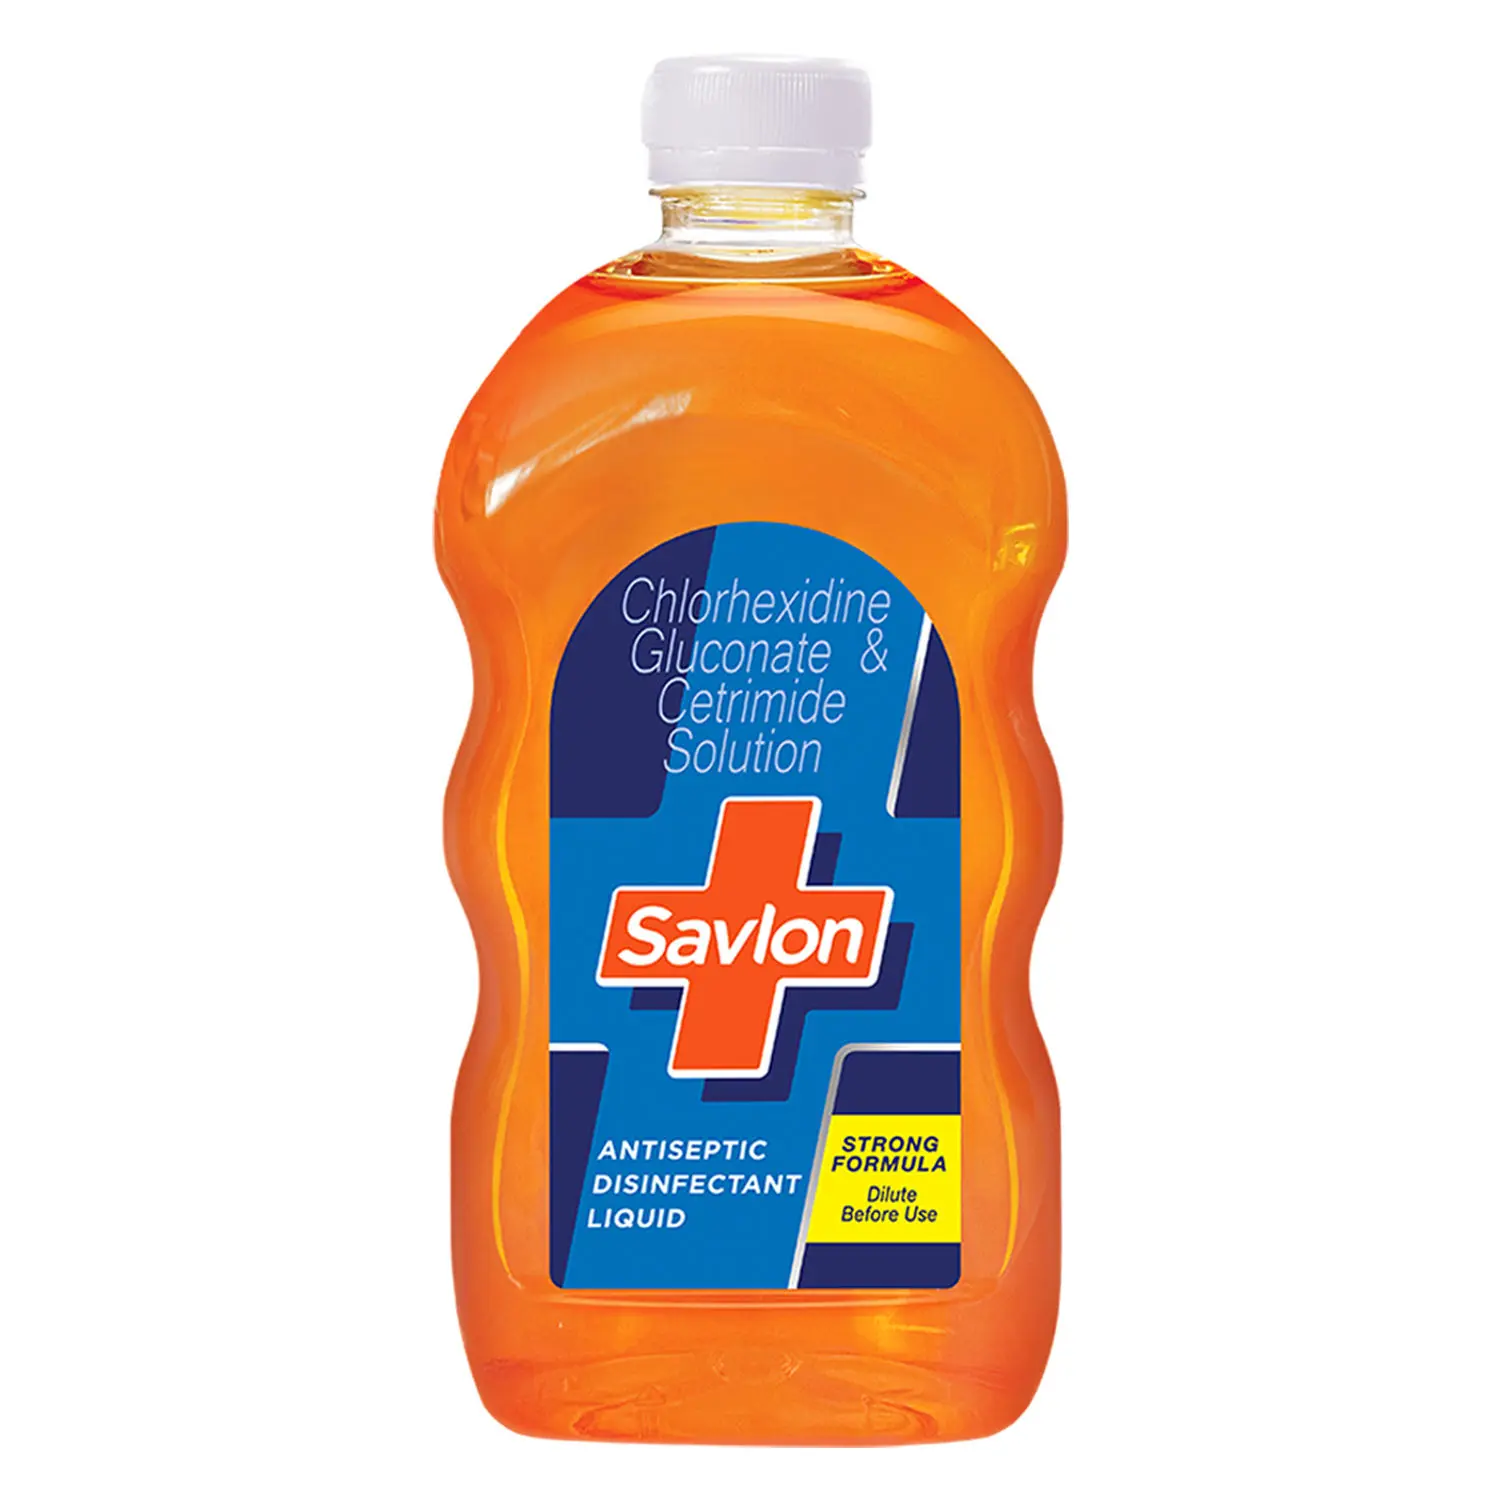 Savlon Antiseptic Disinfectant Liquid for First Aid, Personal Hygiene, and Home Hygiene - 500ml